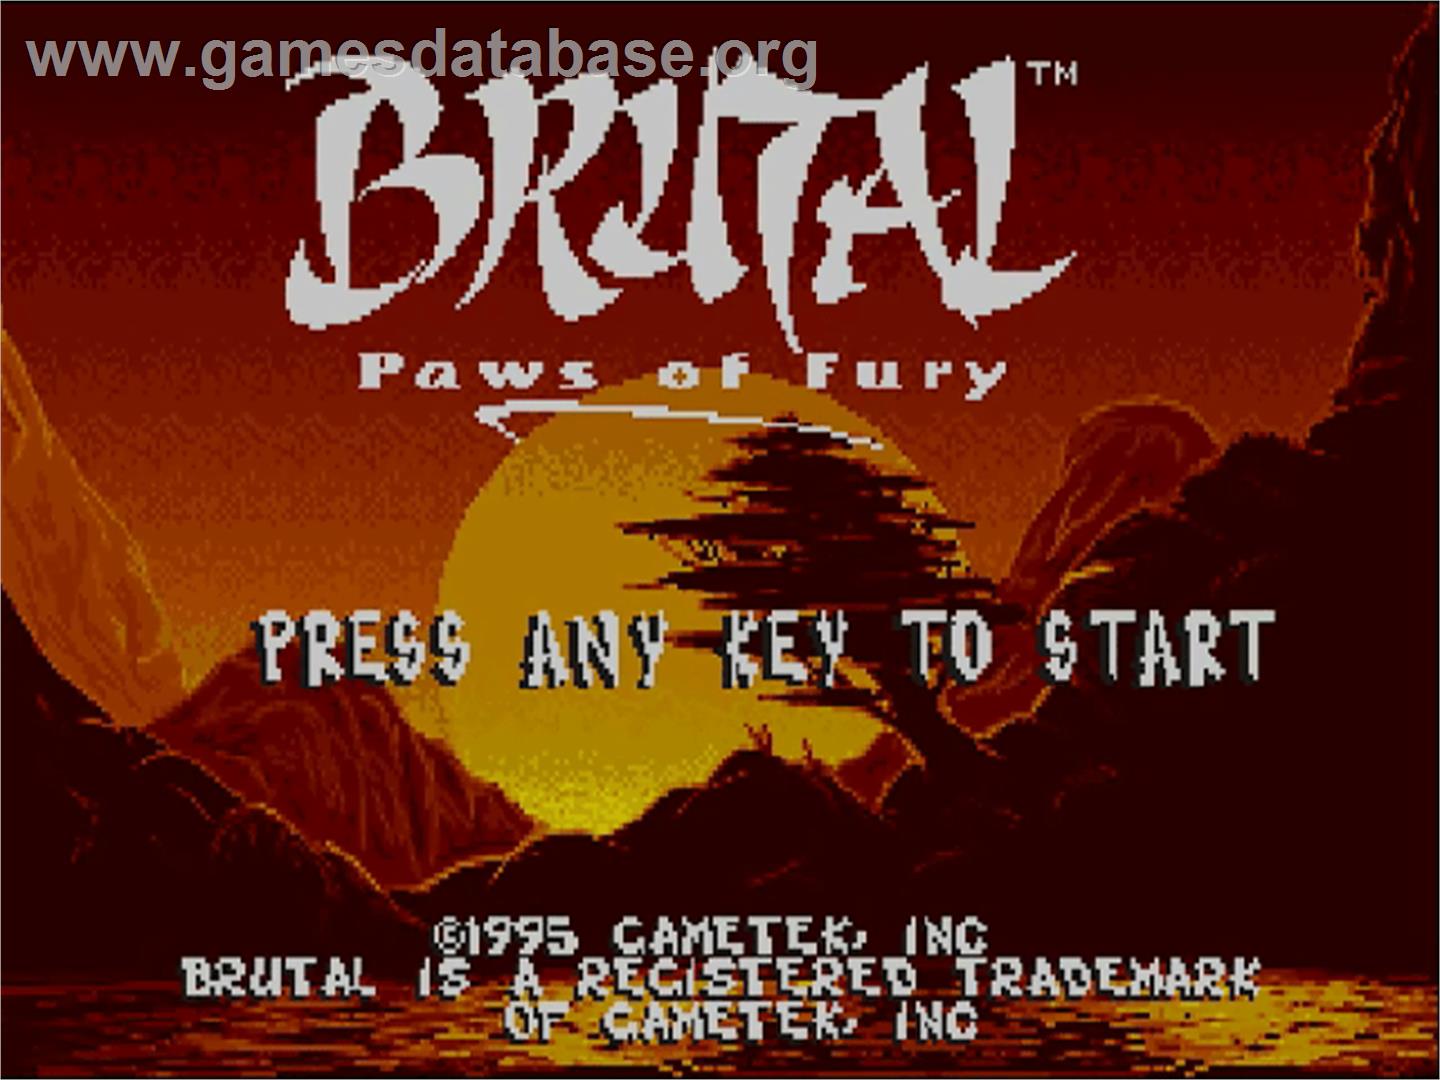 Brutal: Paws of Fury - Commodore Amiga CD32 - Artwork - Title Screen